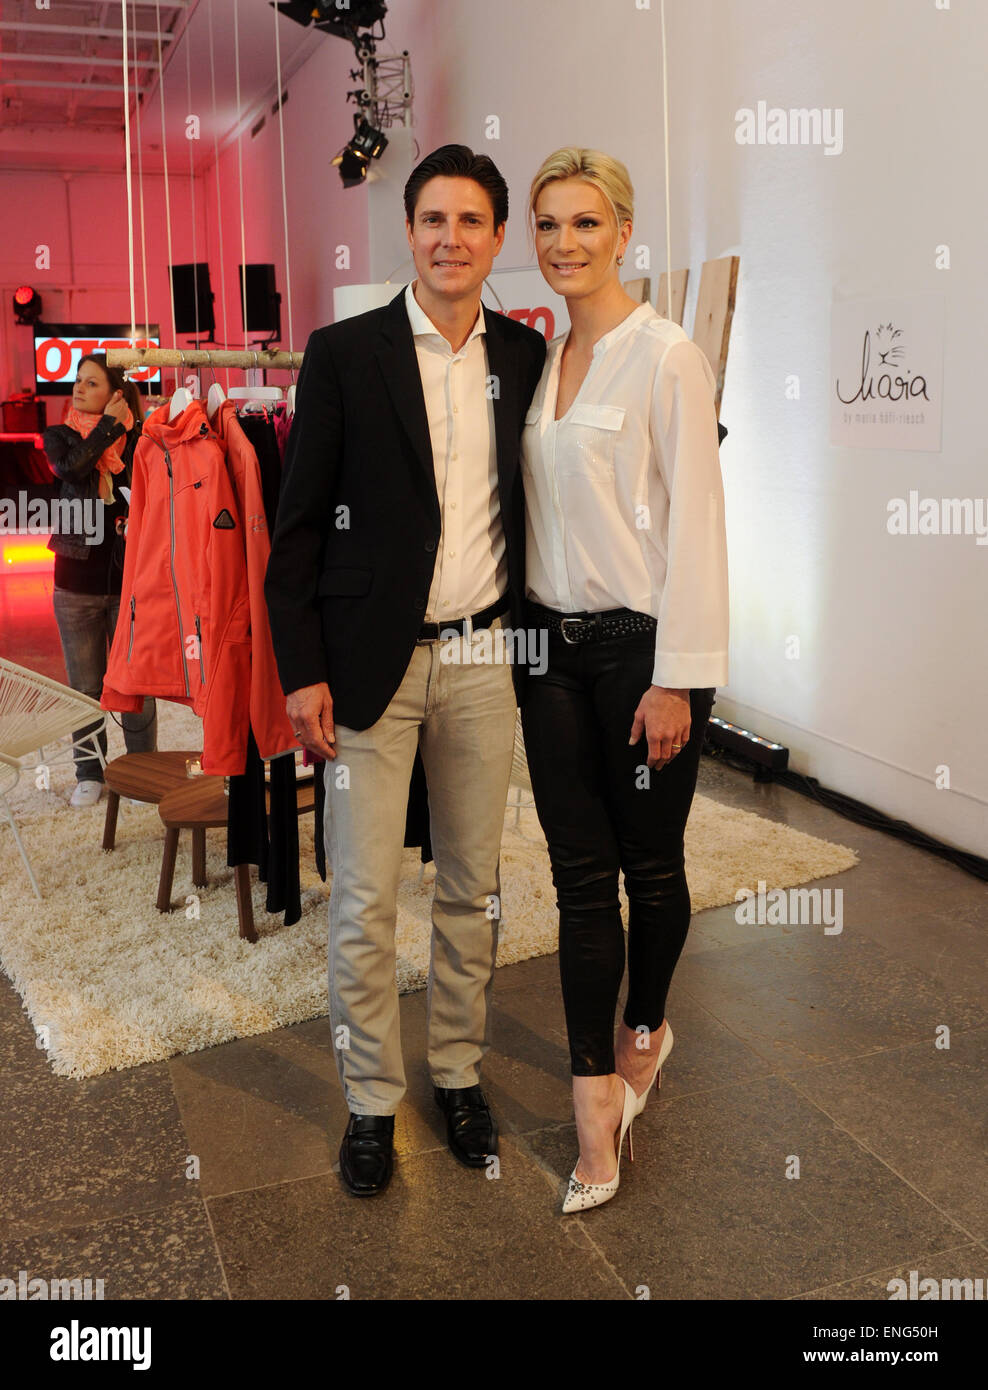 Munich, Germany. 04th May, 2015. Former ski racer Maria Hoefl-Riesch and her husband Marcus Hoefl pose during an event of the catalog company Otto in Munich, Germany, 04 May 2015. Hoefl-Riesch and Otto have a cooperation for a joint clothing line. Photo: TOBIAS HASE/dpa/Alamy Live News Stock Photo